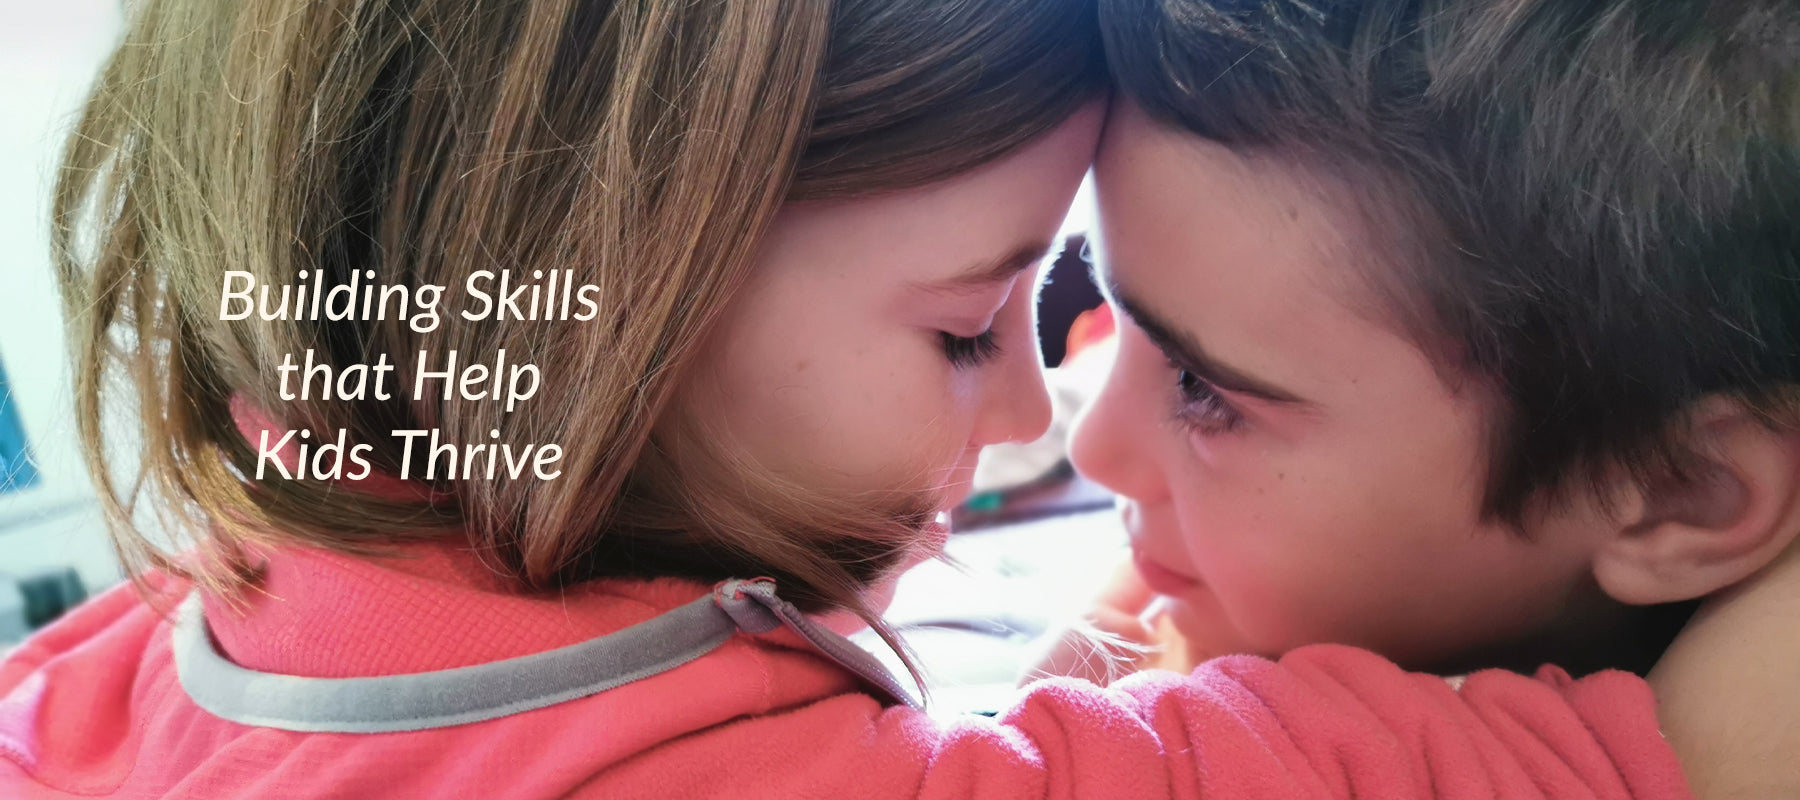 A young girl dressed in a bright pink jersey hugs her brother with their foreheads touching. The words 'Building Skills that Help Kids Thrive' sits in the foreground. 